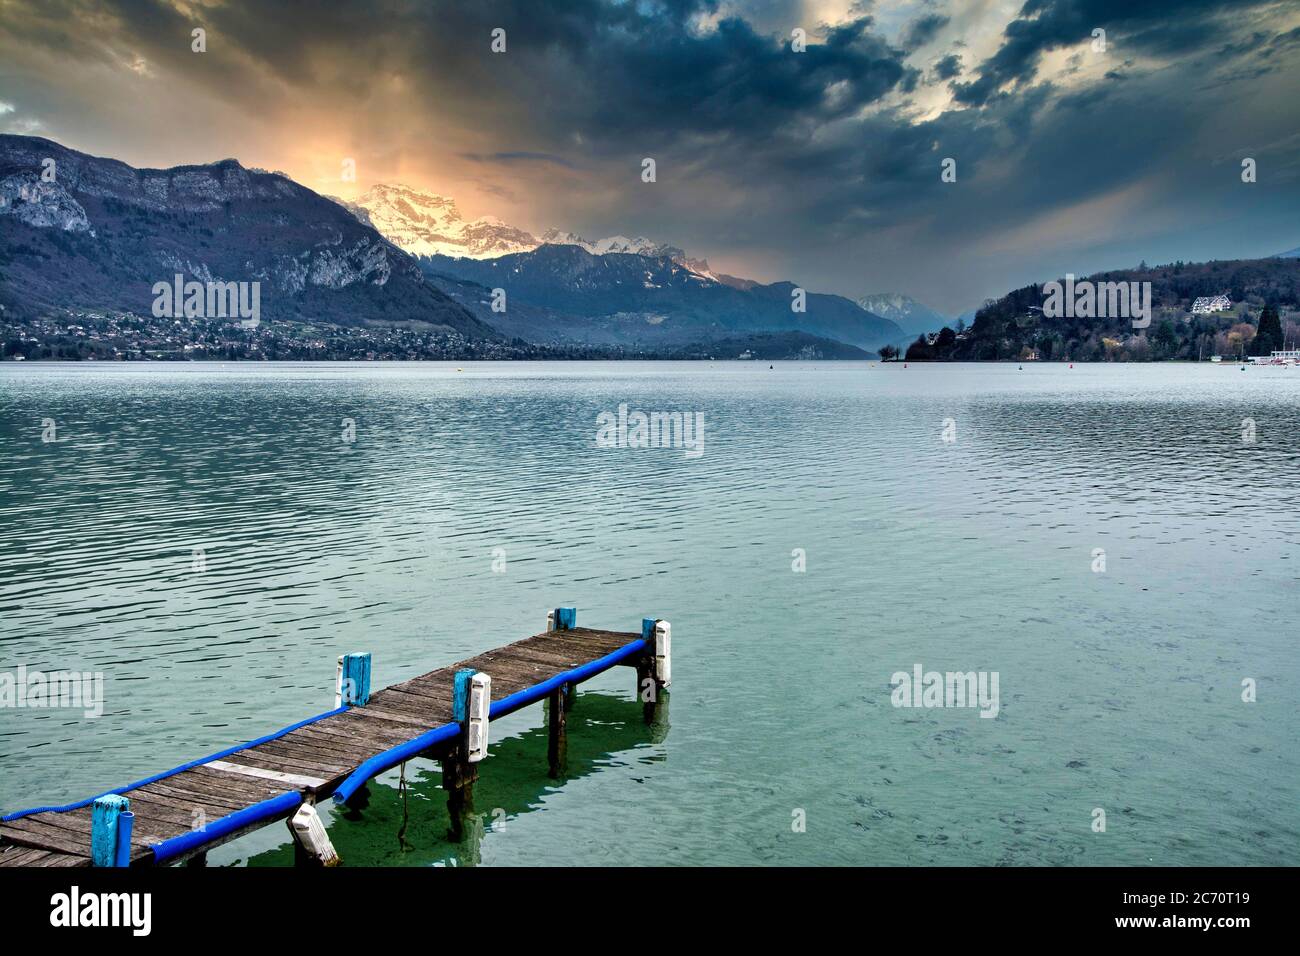 Boats on Lake of Annecy, Haute-Savoie department, Auvergne-Rhone-Alpes, France Stock Photo